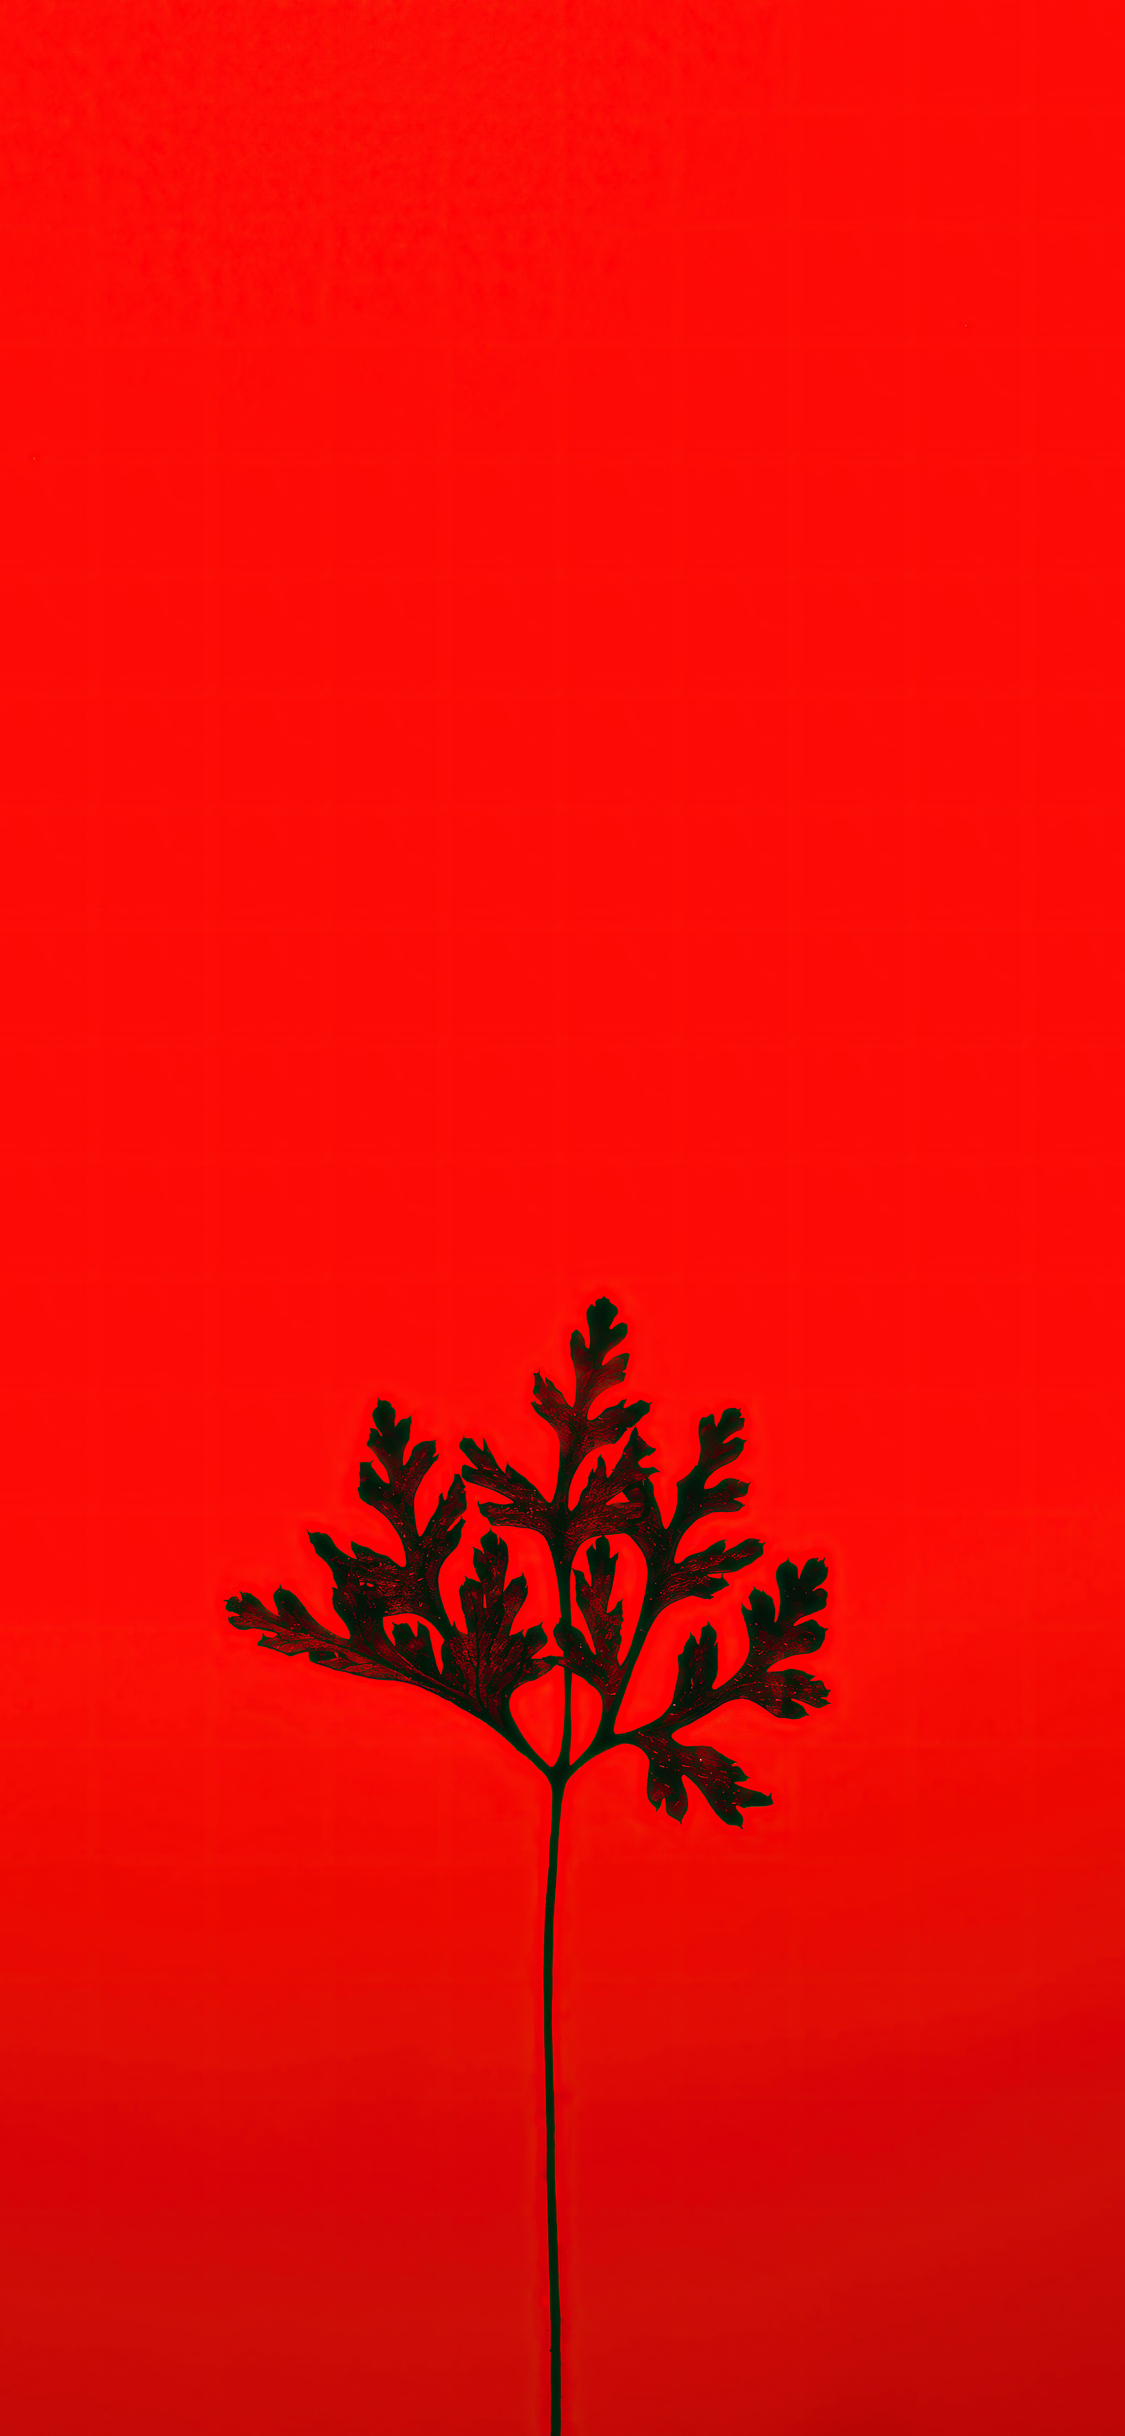 A silhouette of a plant against a red background - IPhone red, red